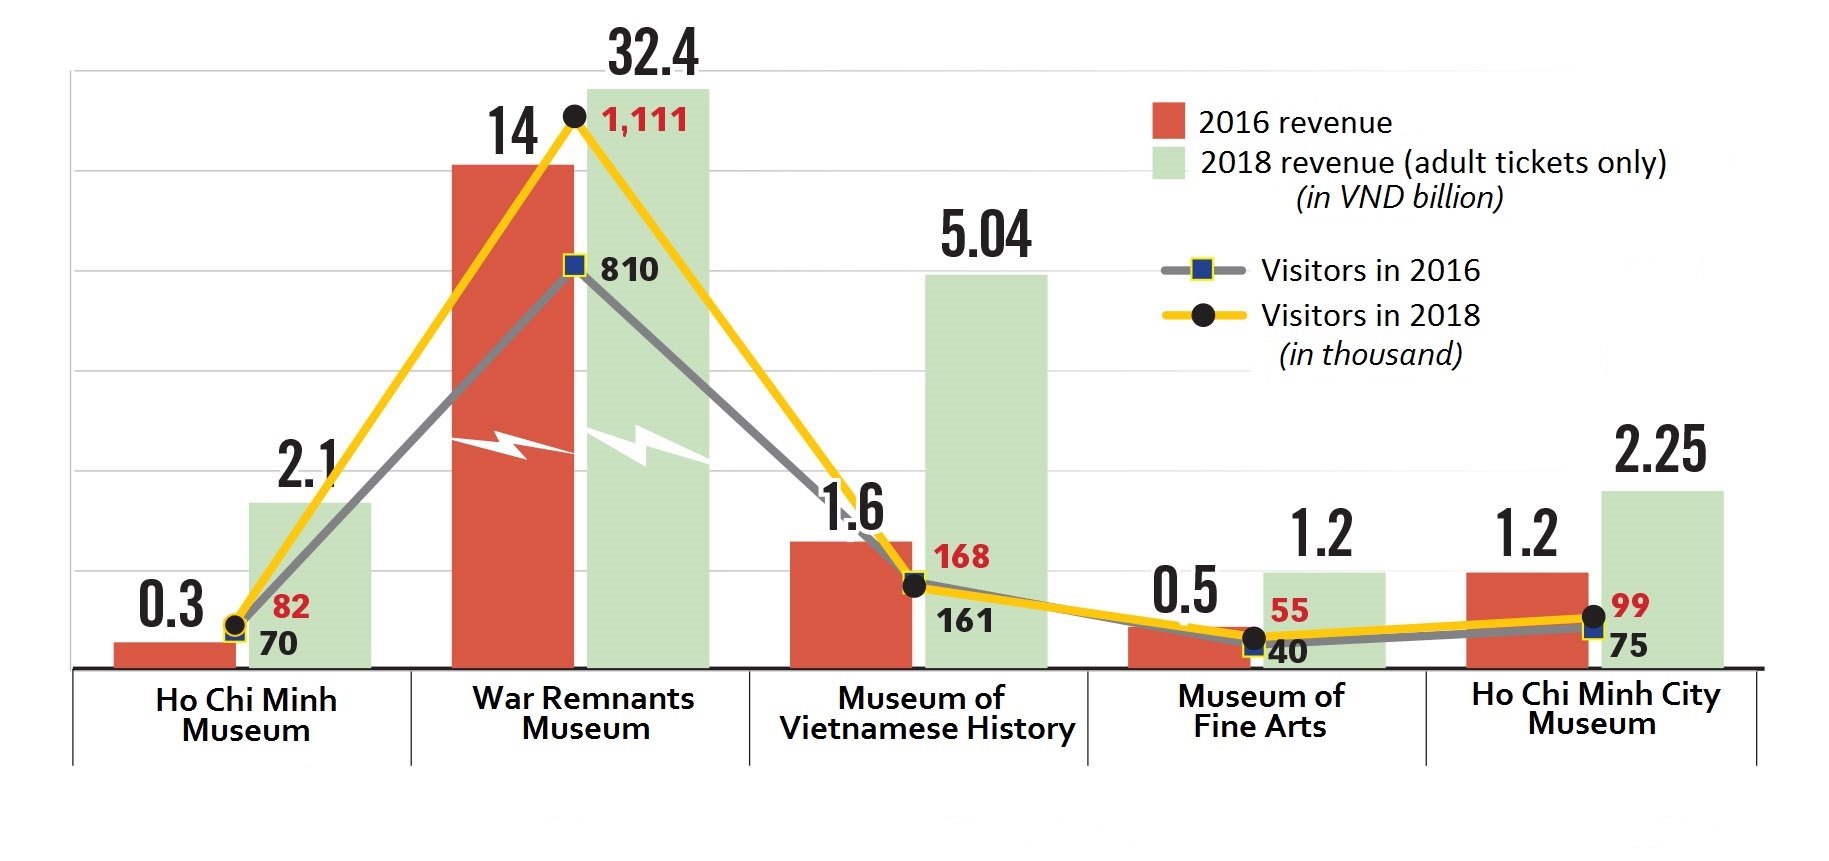 An infographic illustrating the number of visitors and revenues of different museums in Ho Chi Minh City in 2016 and their expected figures in 2018. Graphic: Tuoi Tre